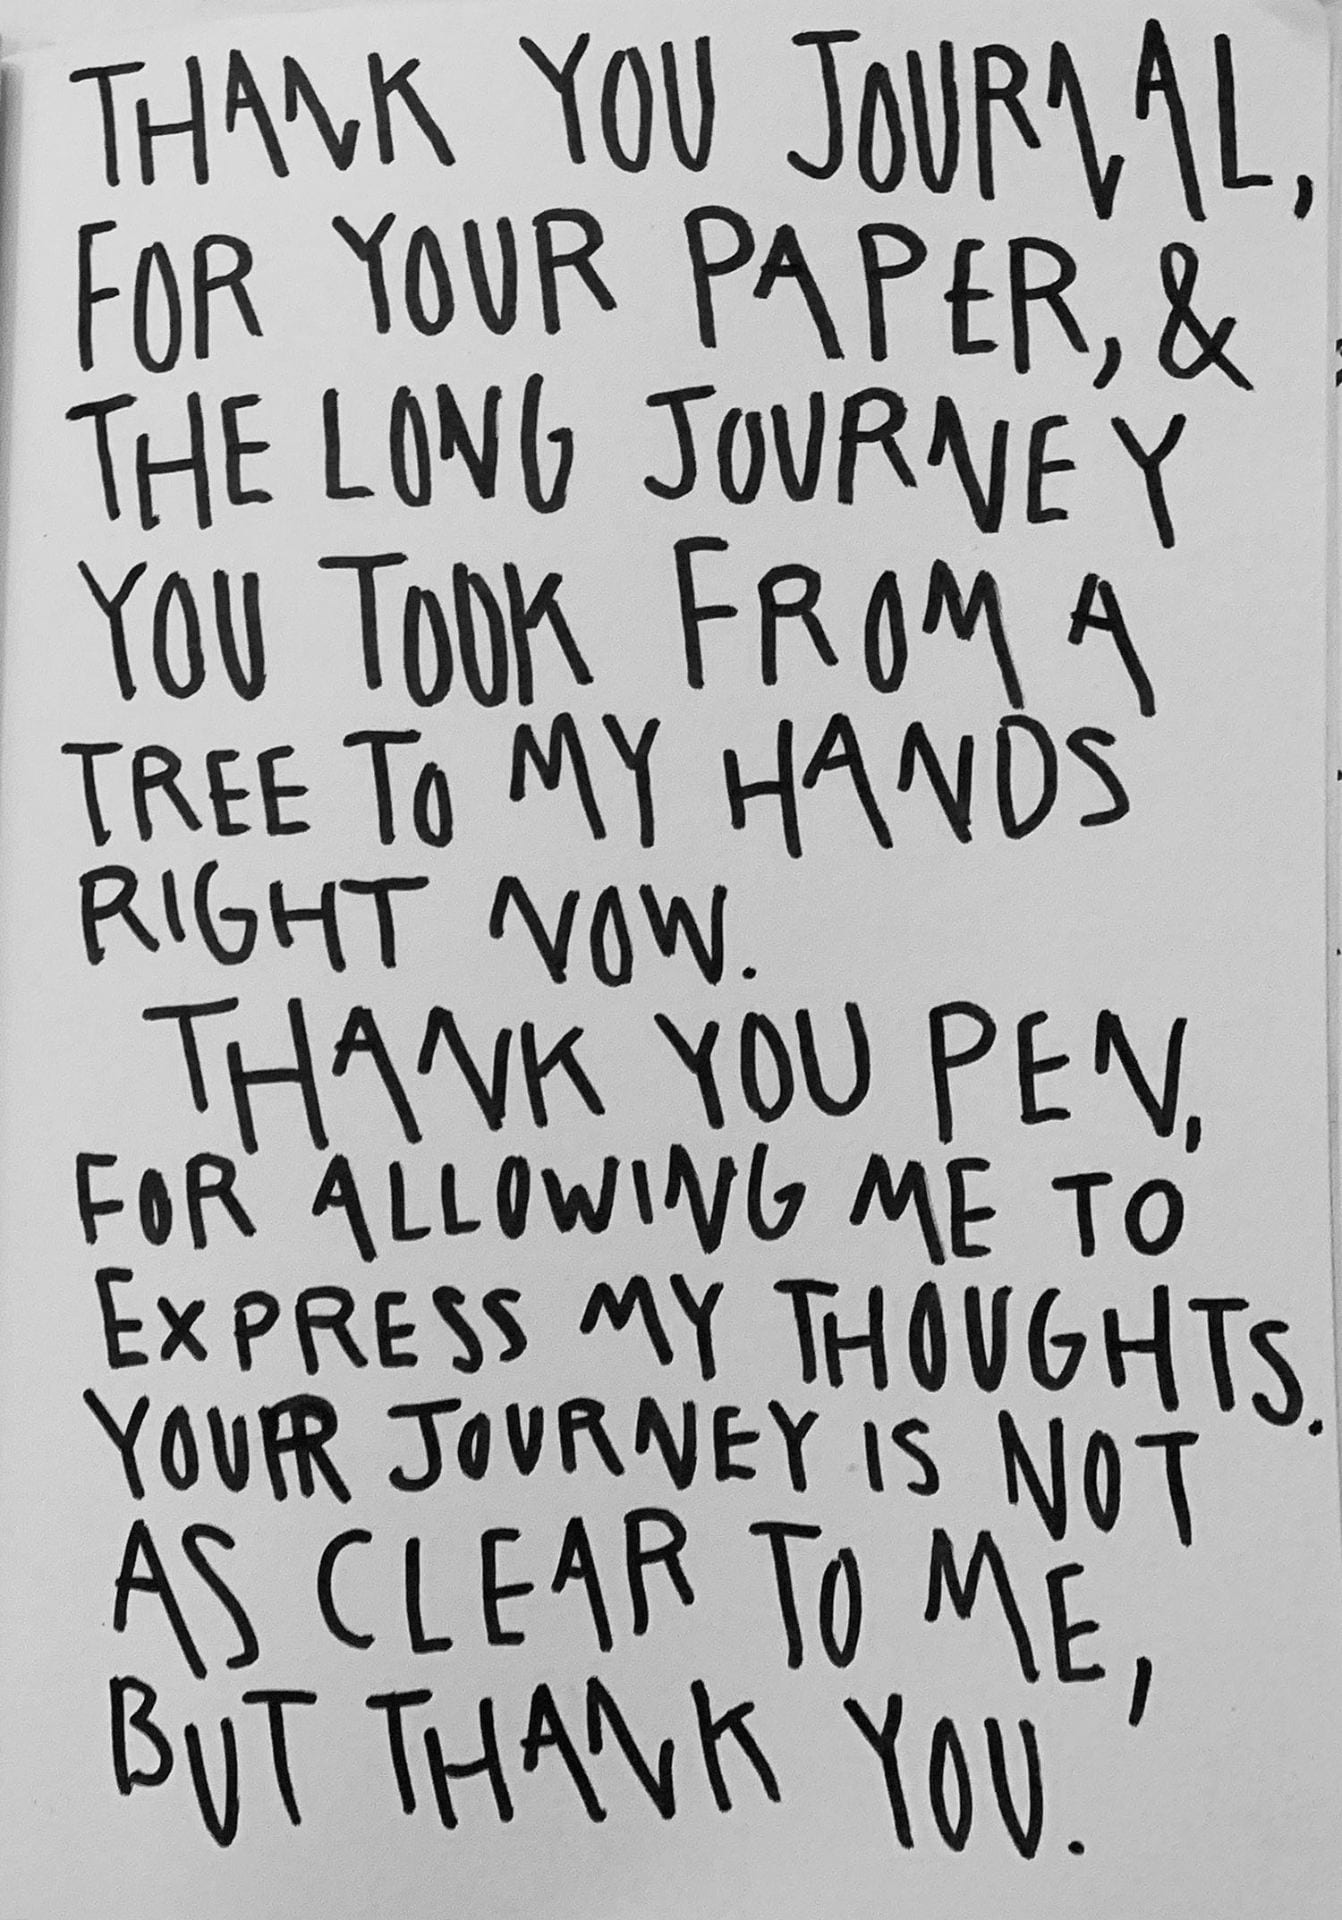 handwritten words: thank you journal, for your paper, & the long journey you took from a tree to my hands right now. Thank you pen, for allowing me to express my thoughts. Your journey is not as clear to me, but thank you.